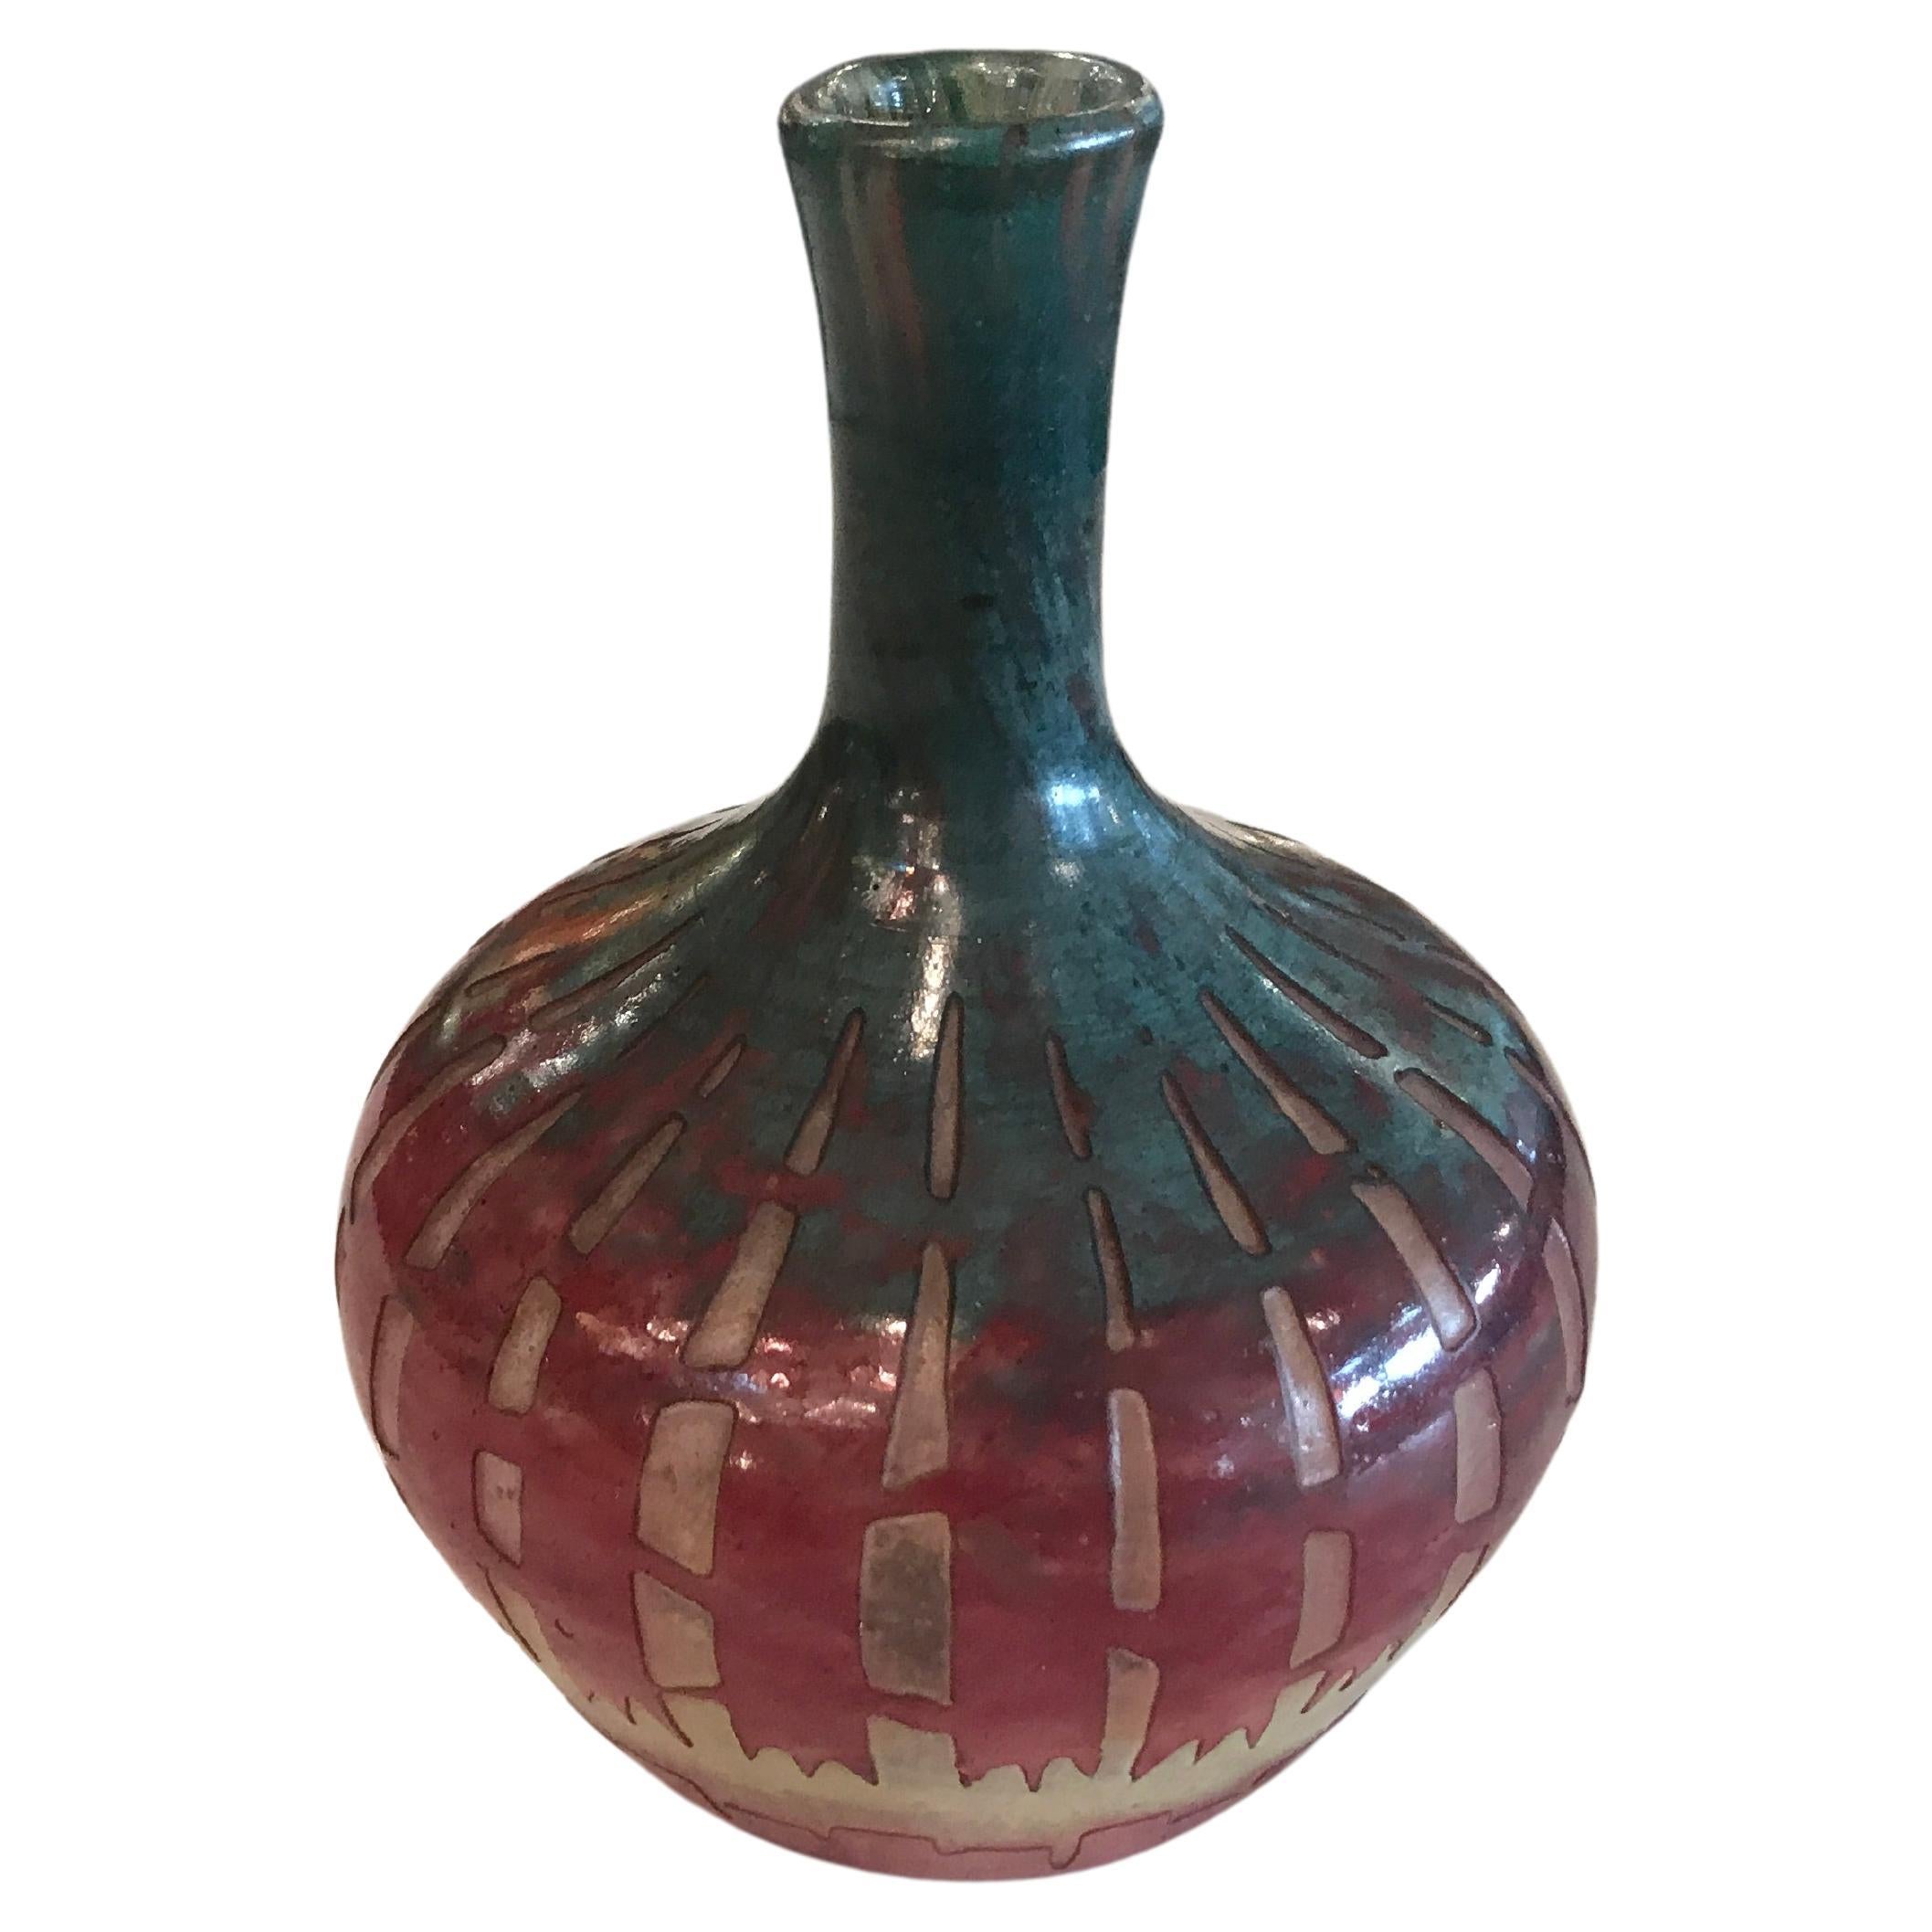  Vase Schneider With the symbol of candy or French flag, (Chickoree), 1920 For Sale